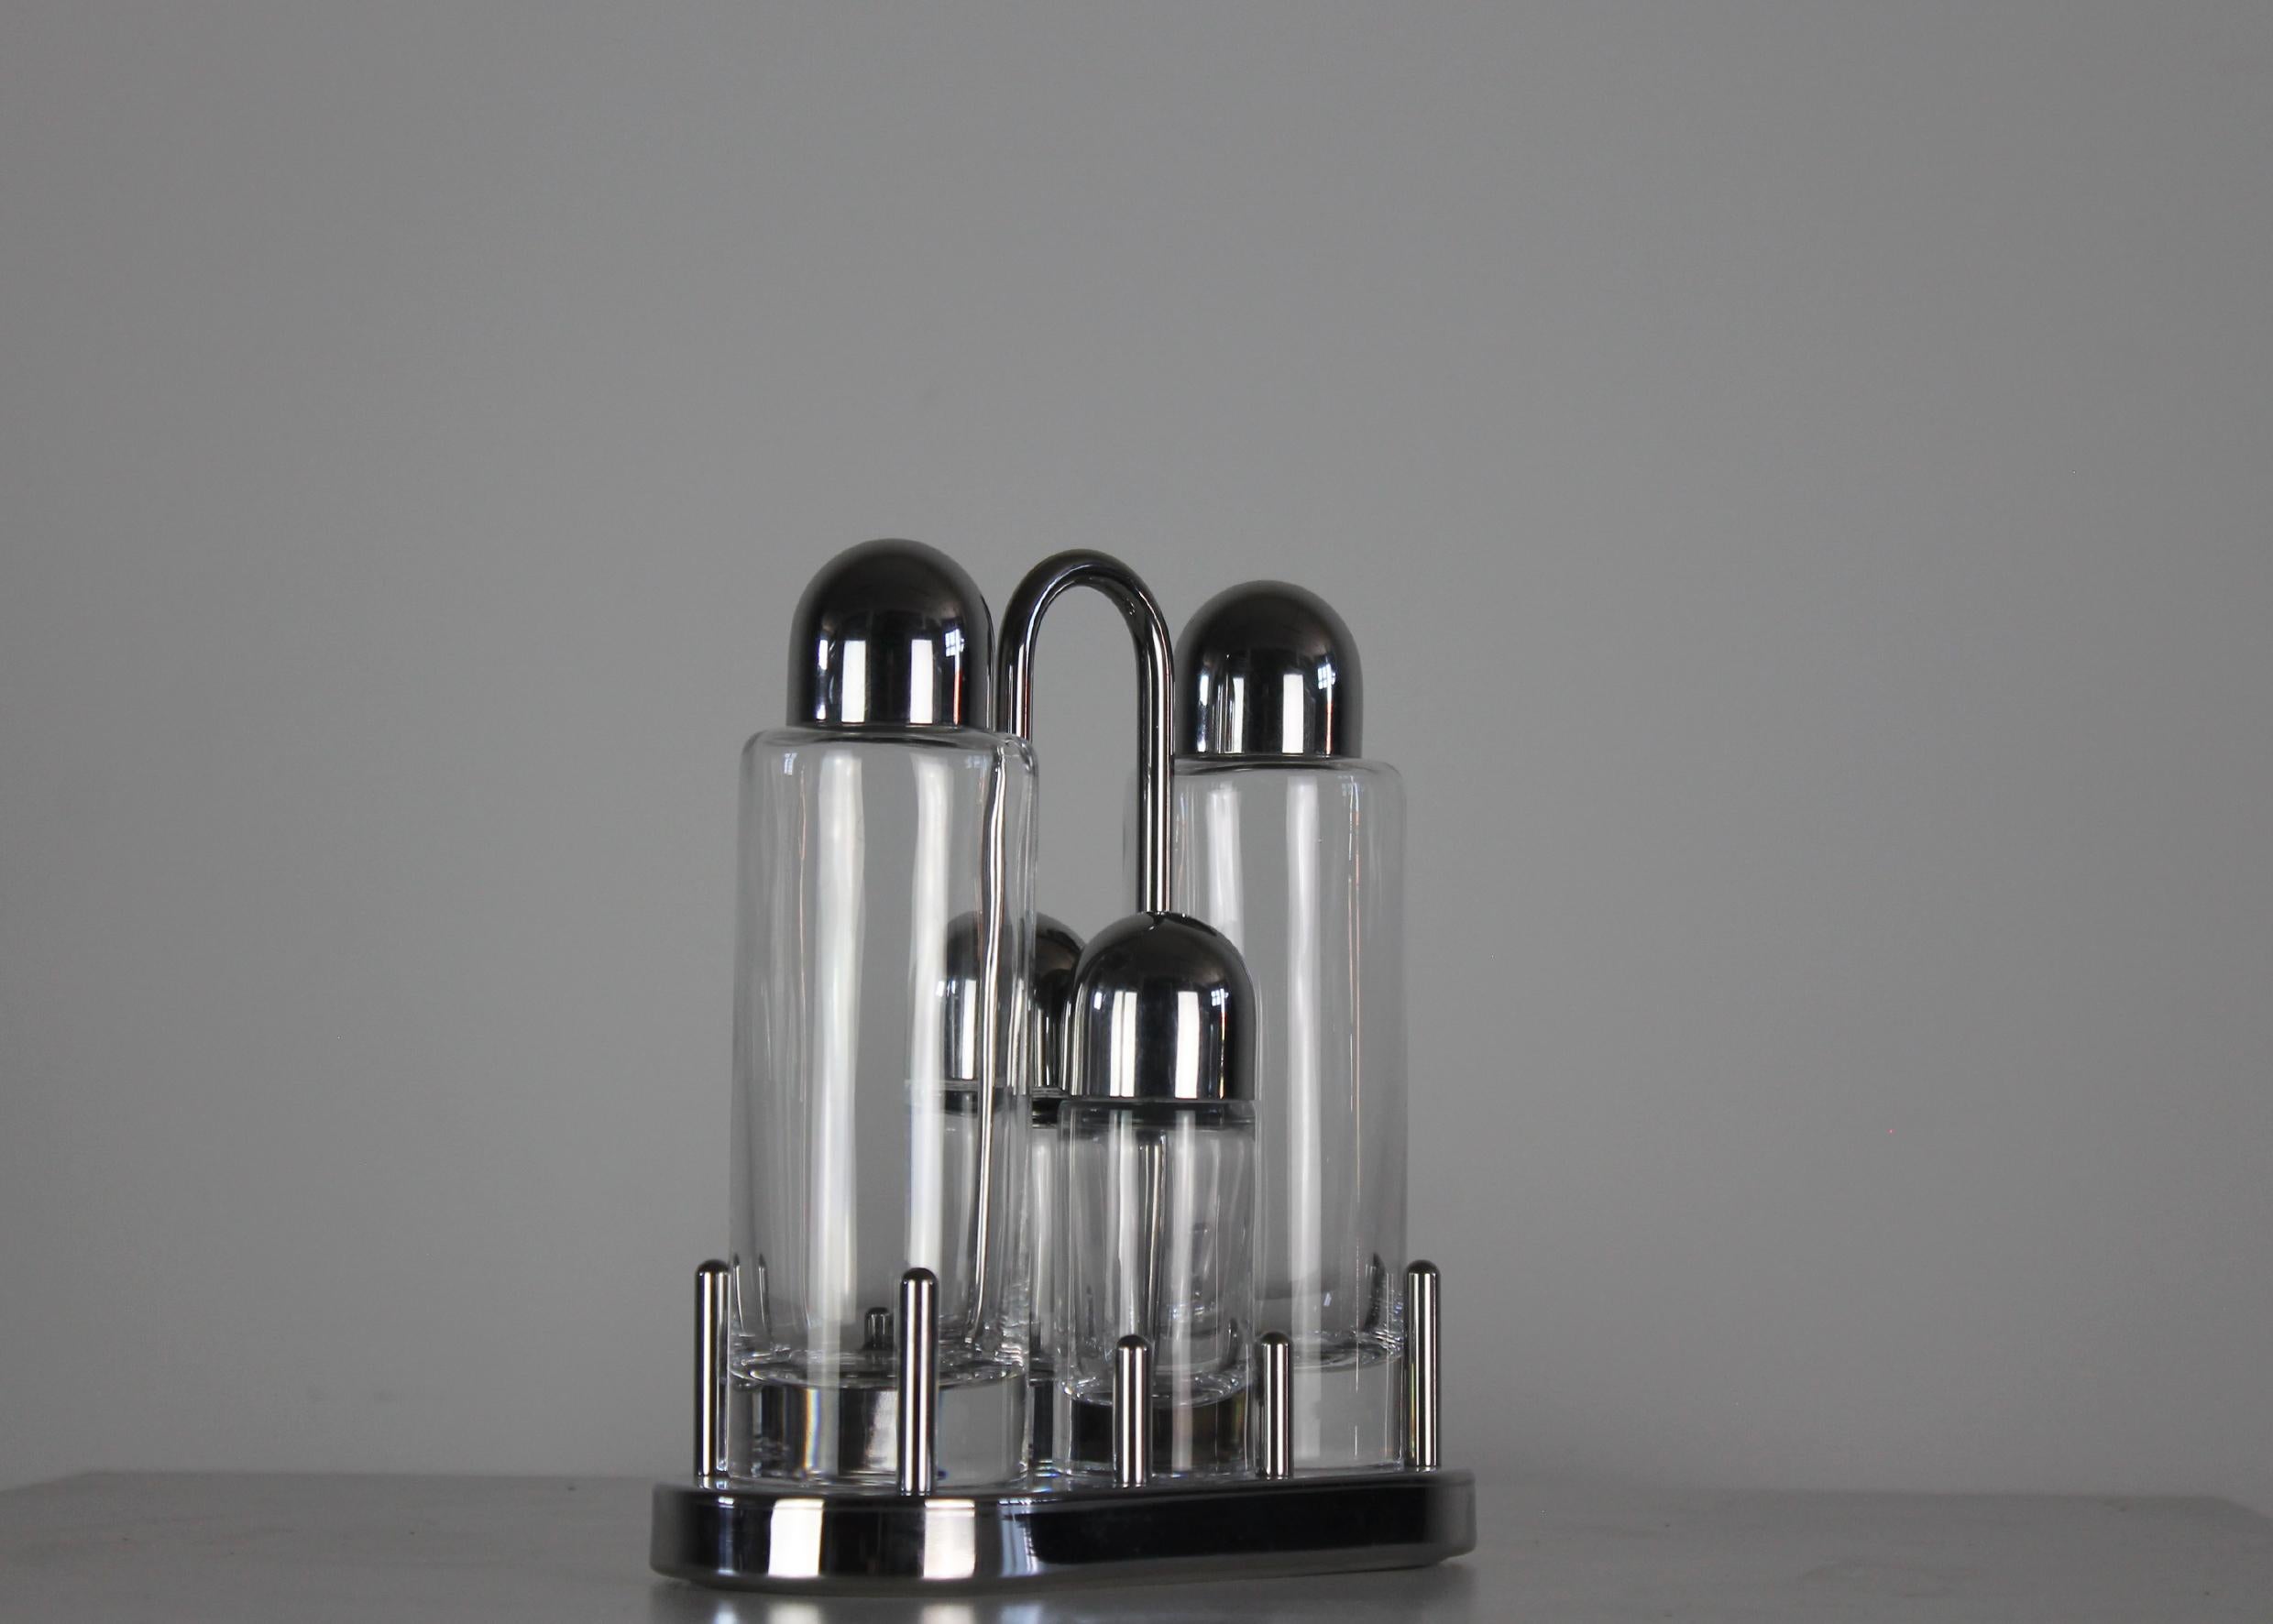 Italian Ettore Sottsass Cruet Set in Stainless Steel and Glass by Alessi 1978 Italy